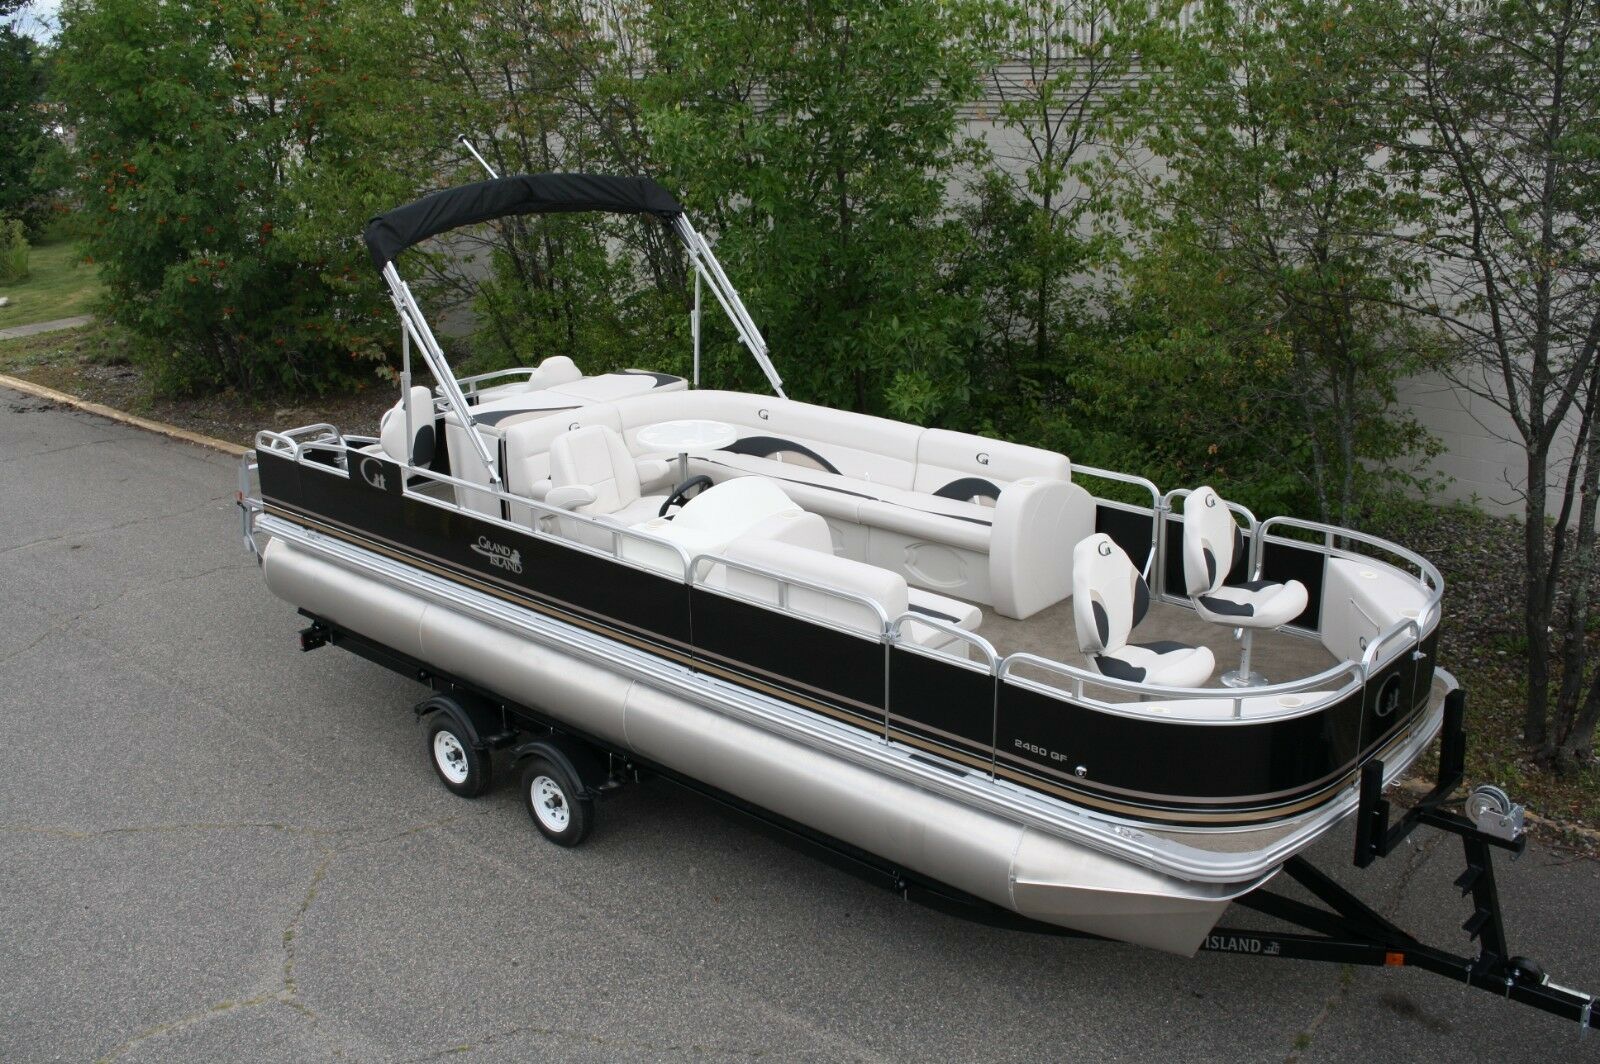 Grand Island 24 Fish And Fun Re Grand Island 2019 for sale for $29,500.